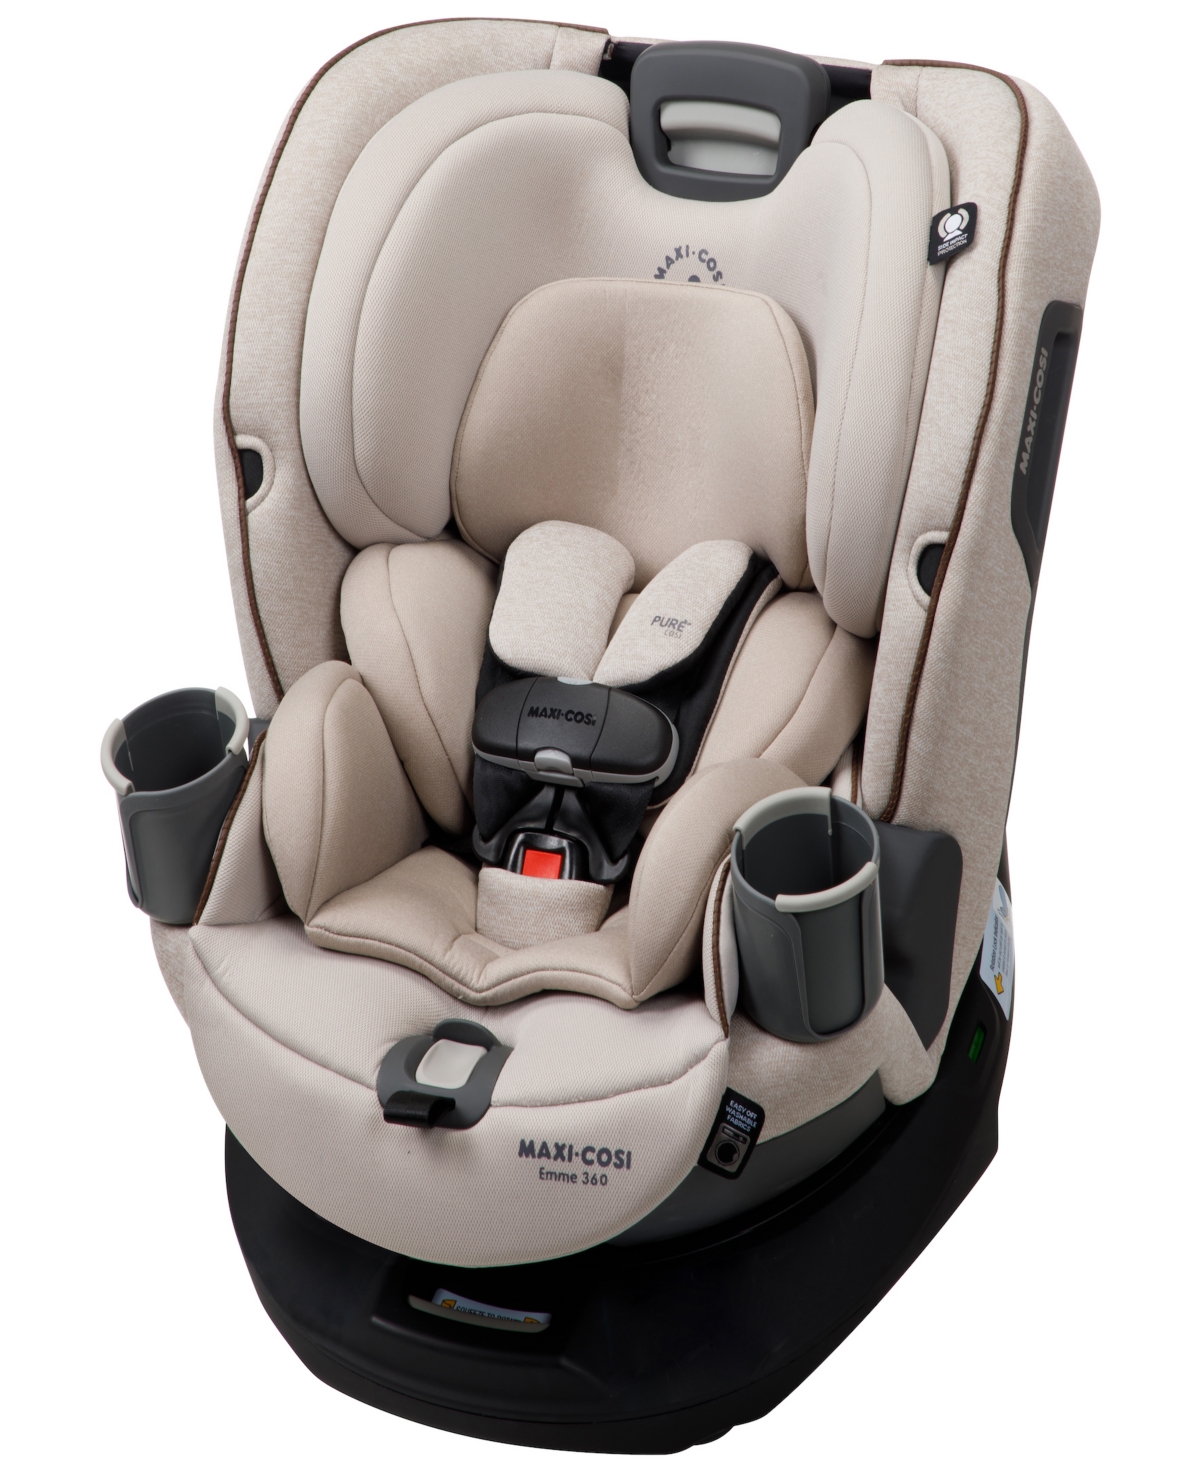 Maxi-Cosi Baby Girls and Boys Emme 360 Rotating All-In-One Convertible Car Seat